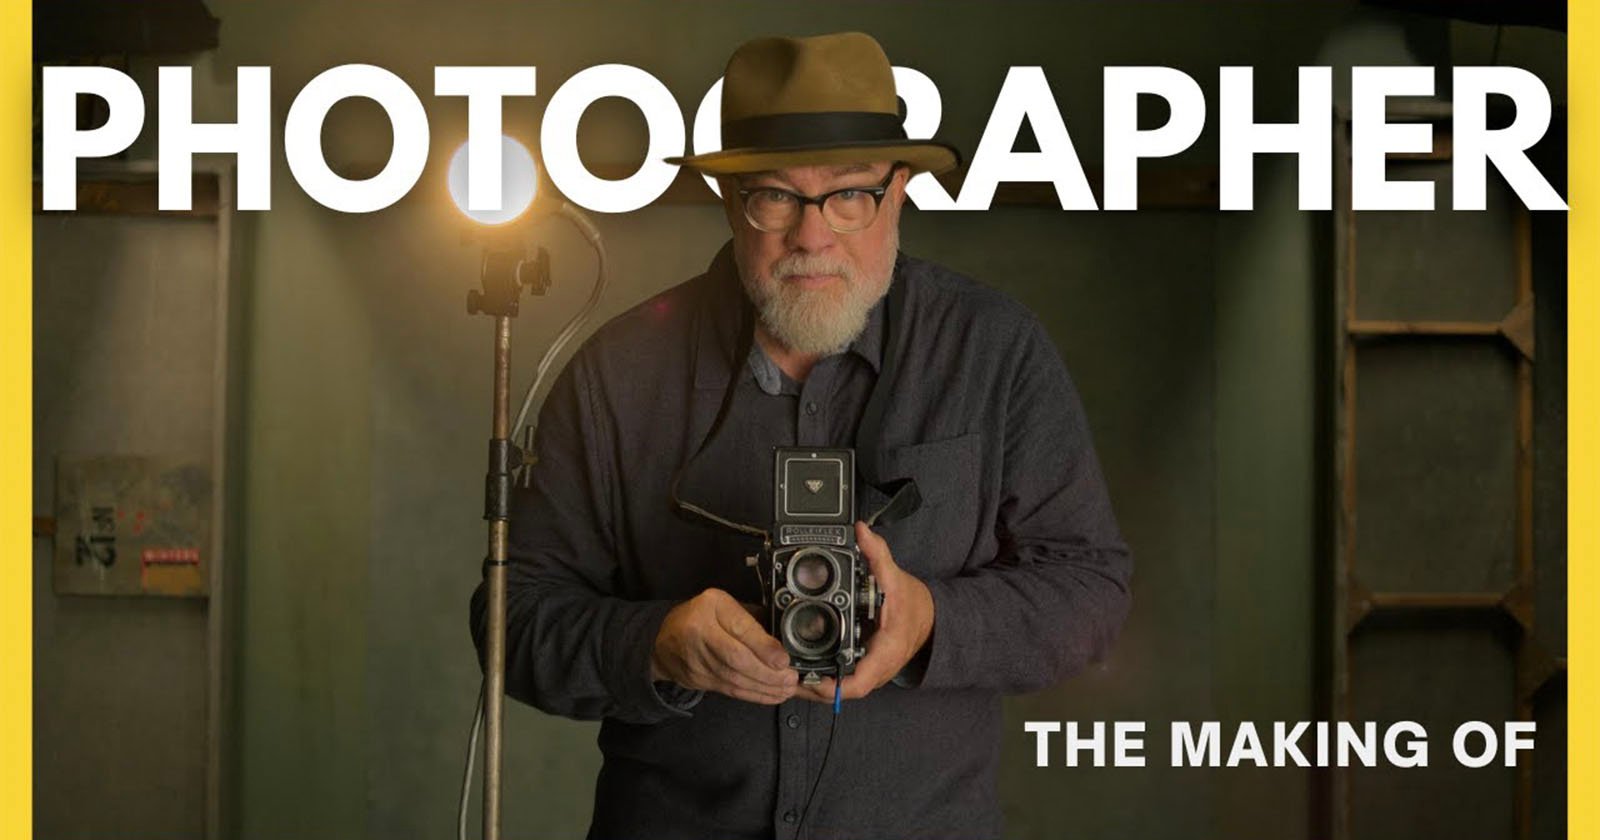 Go Behind the Scenes of Photographer (And Find Out What Camera They Used)